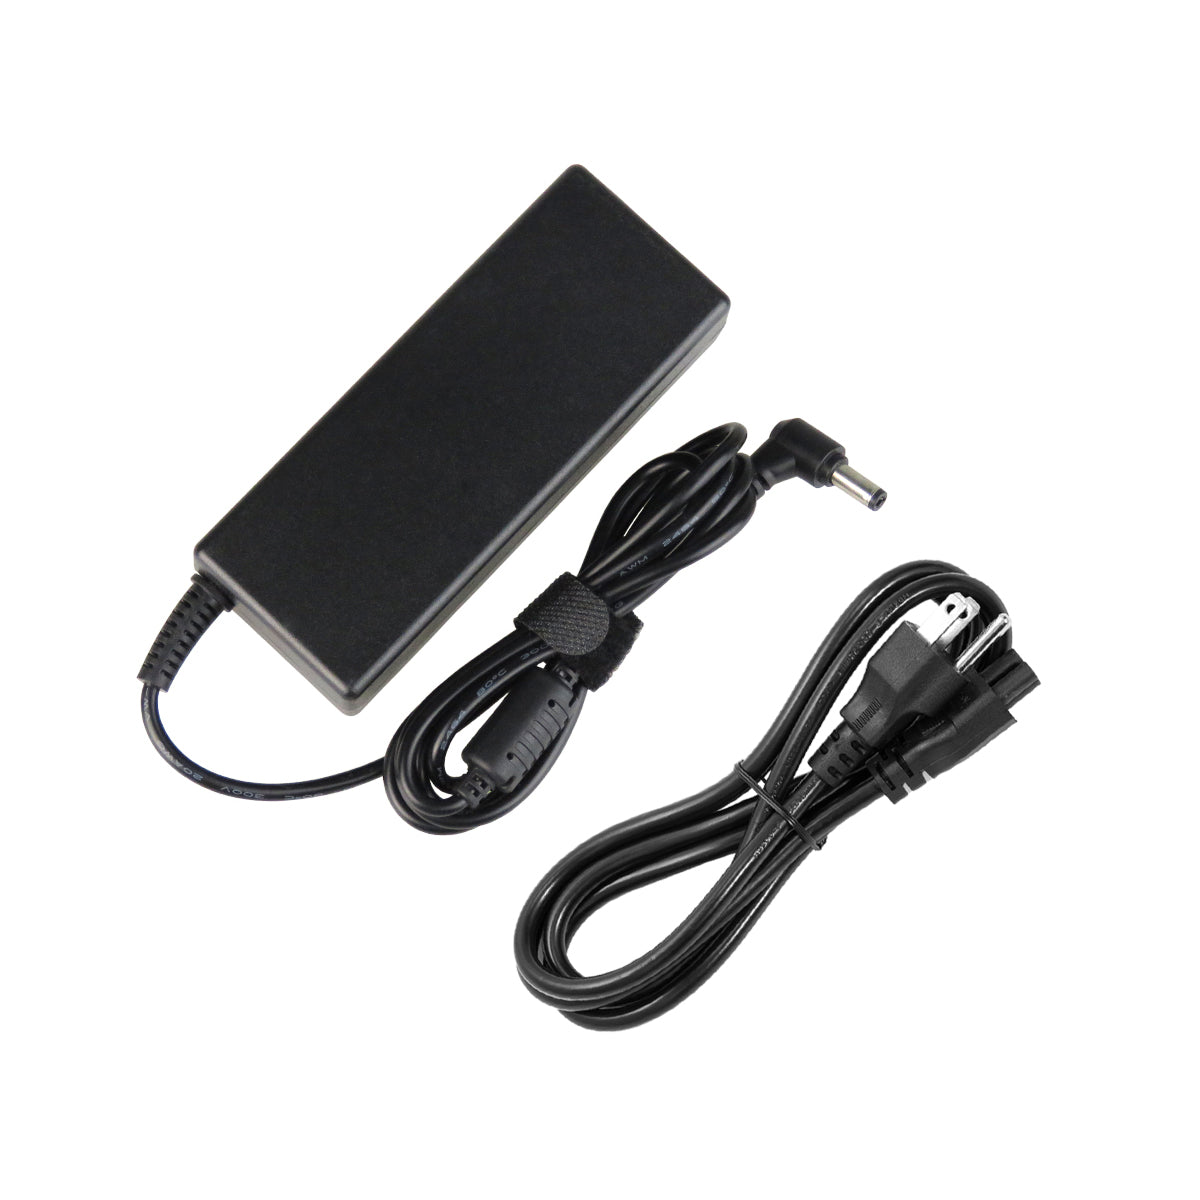 AC Adapter Charger for ASUS A43U Notebook.